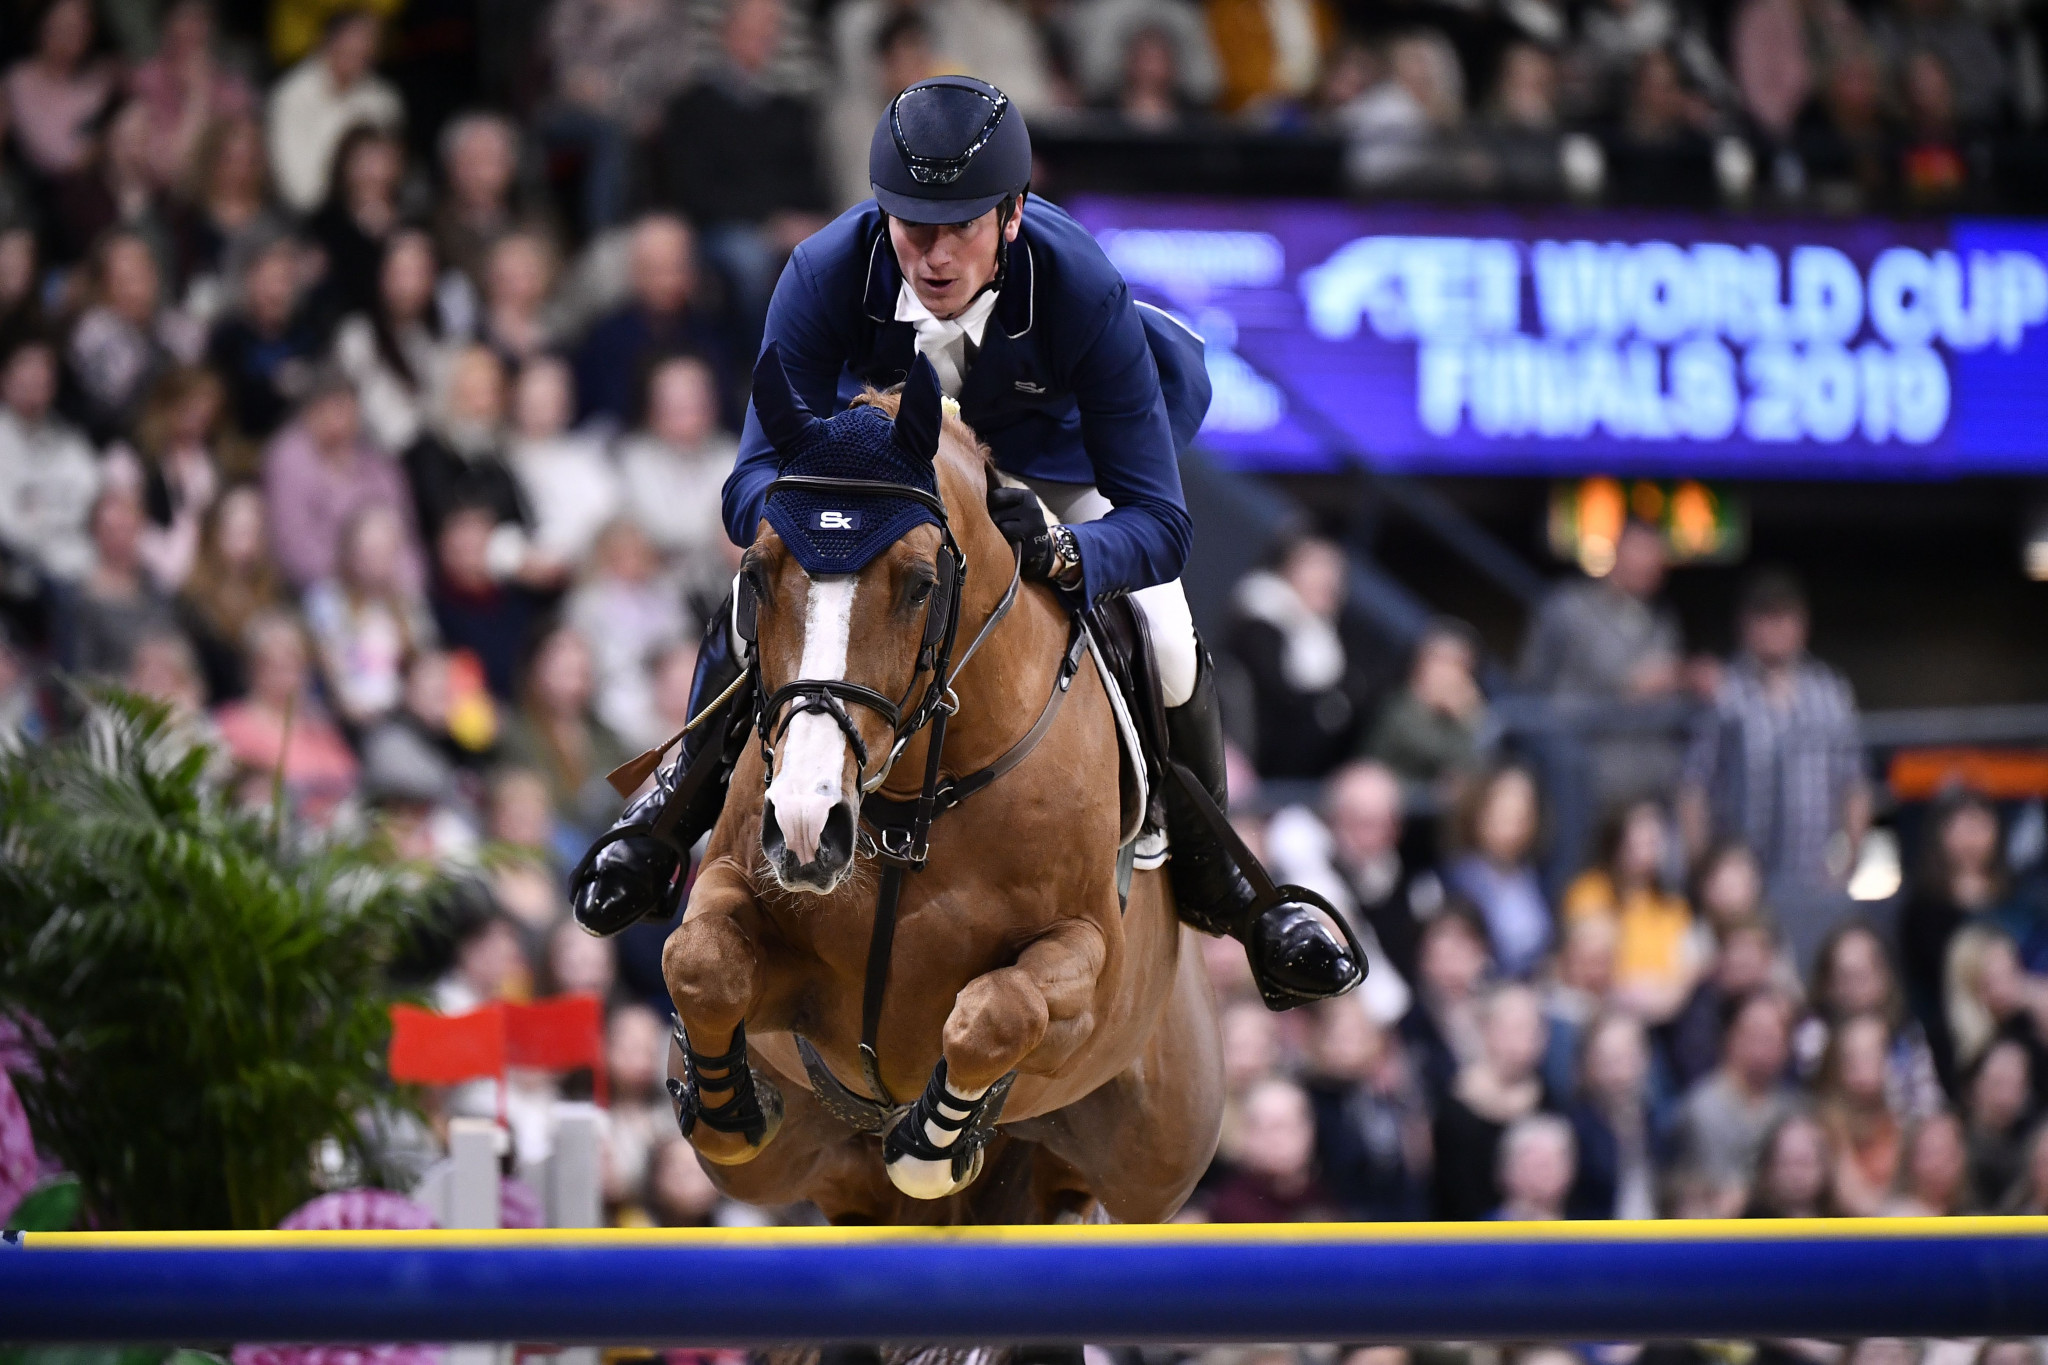 Germany's Daniel Deusser delighted the home crowd by winning the "RWE Prize of North Rhine-Westphalia" event at the World Equestrian Festival in Aachen ©Getty Images